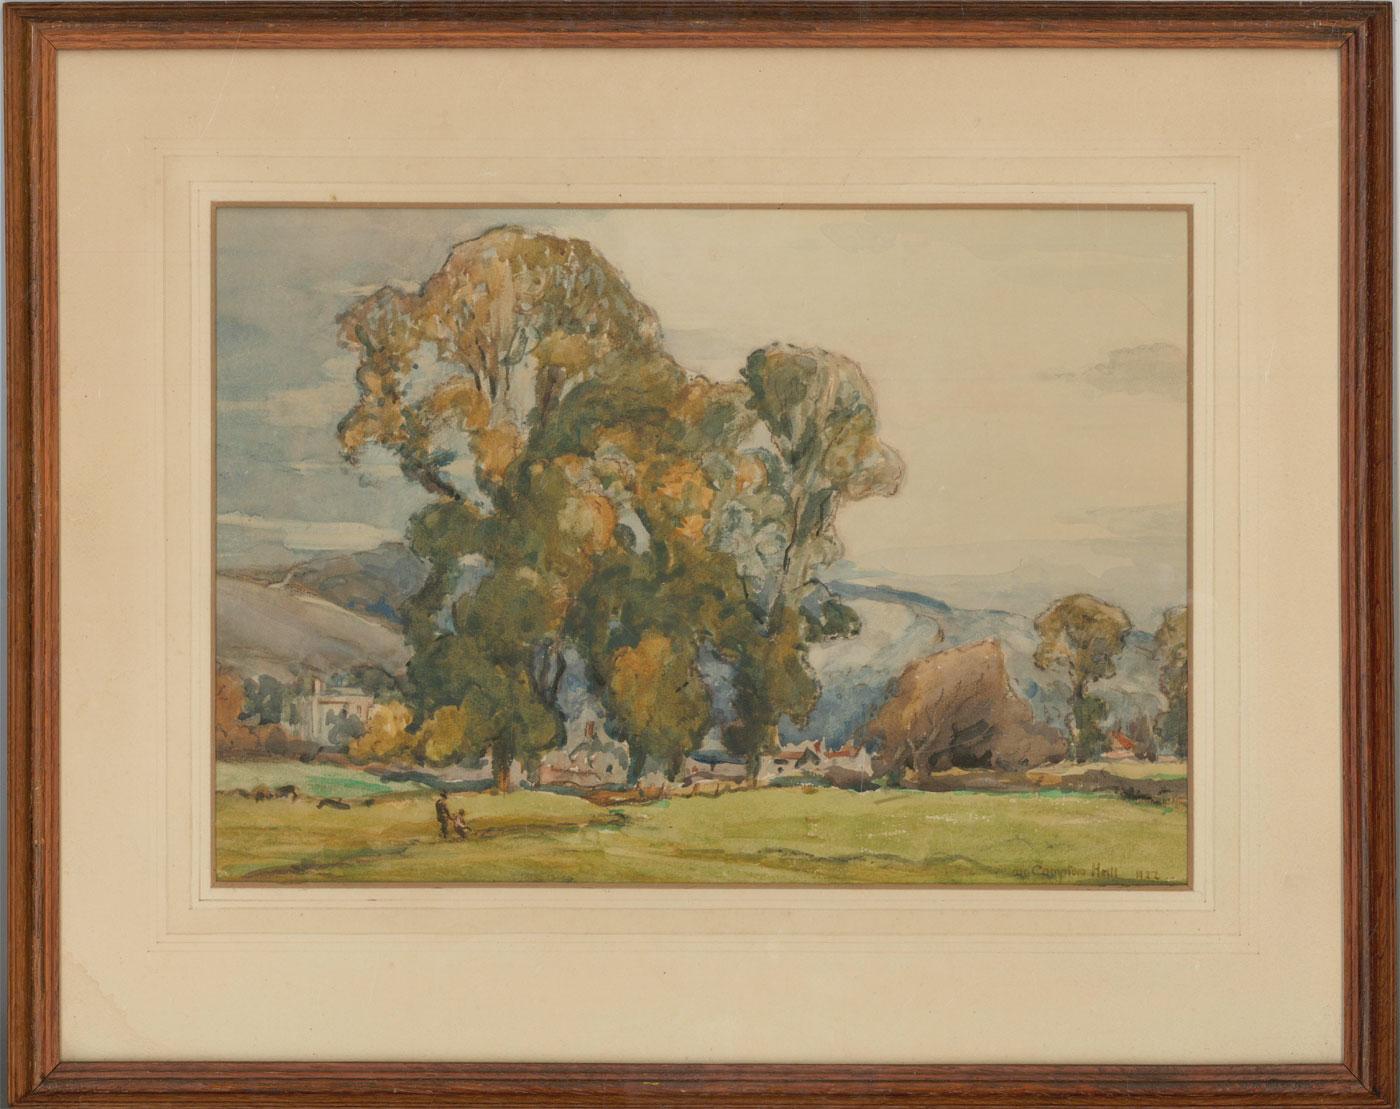 A fine original early 20th Century watercolour by the British artist Joseph Compton Hall RBA (1863-1937), showing a parkland view with a large copse of trees. A country house is nestled to the left, with figures decending the fields. The artist has